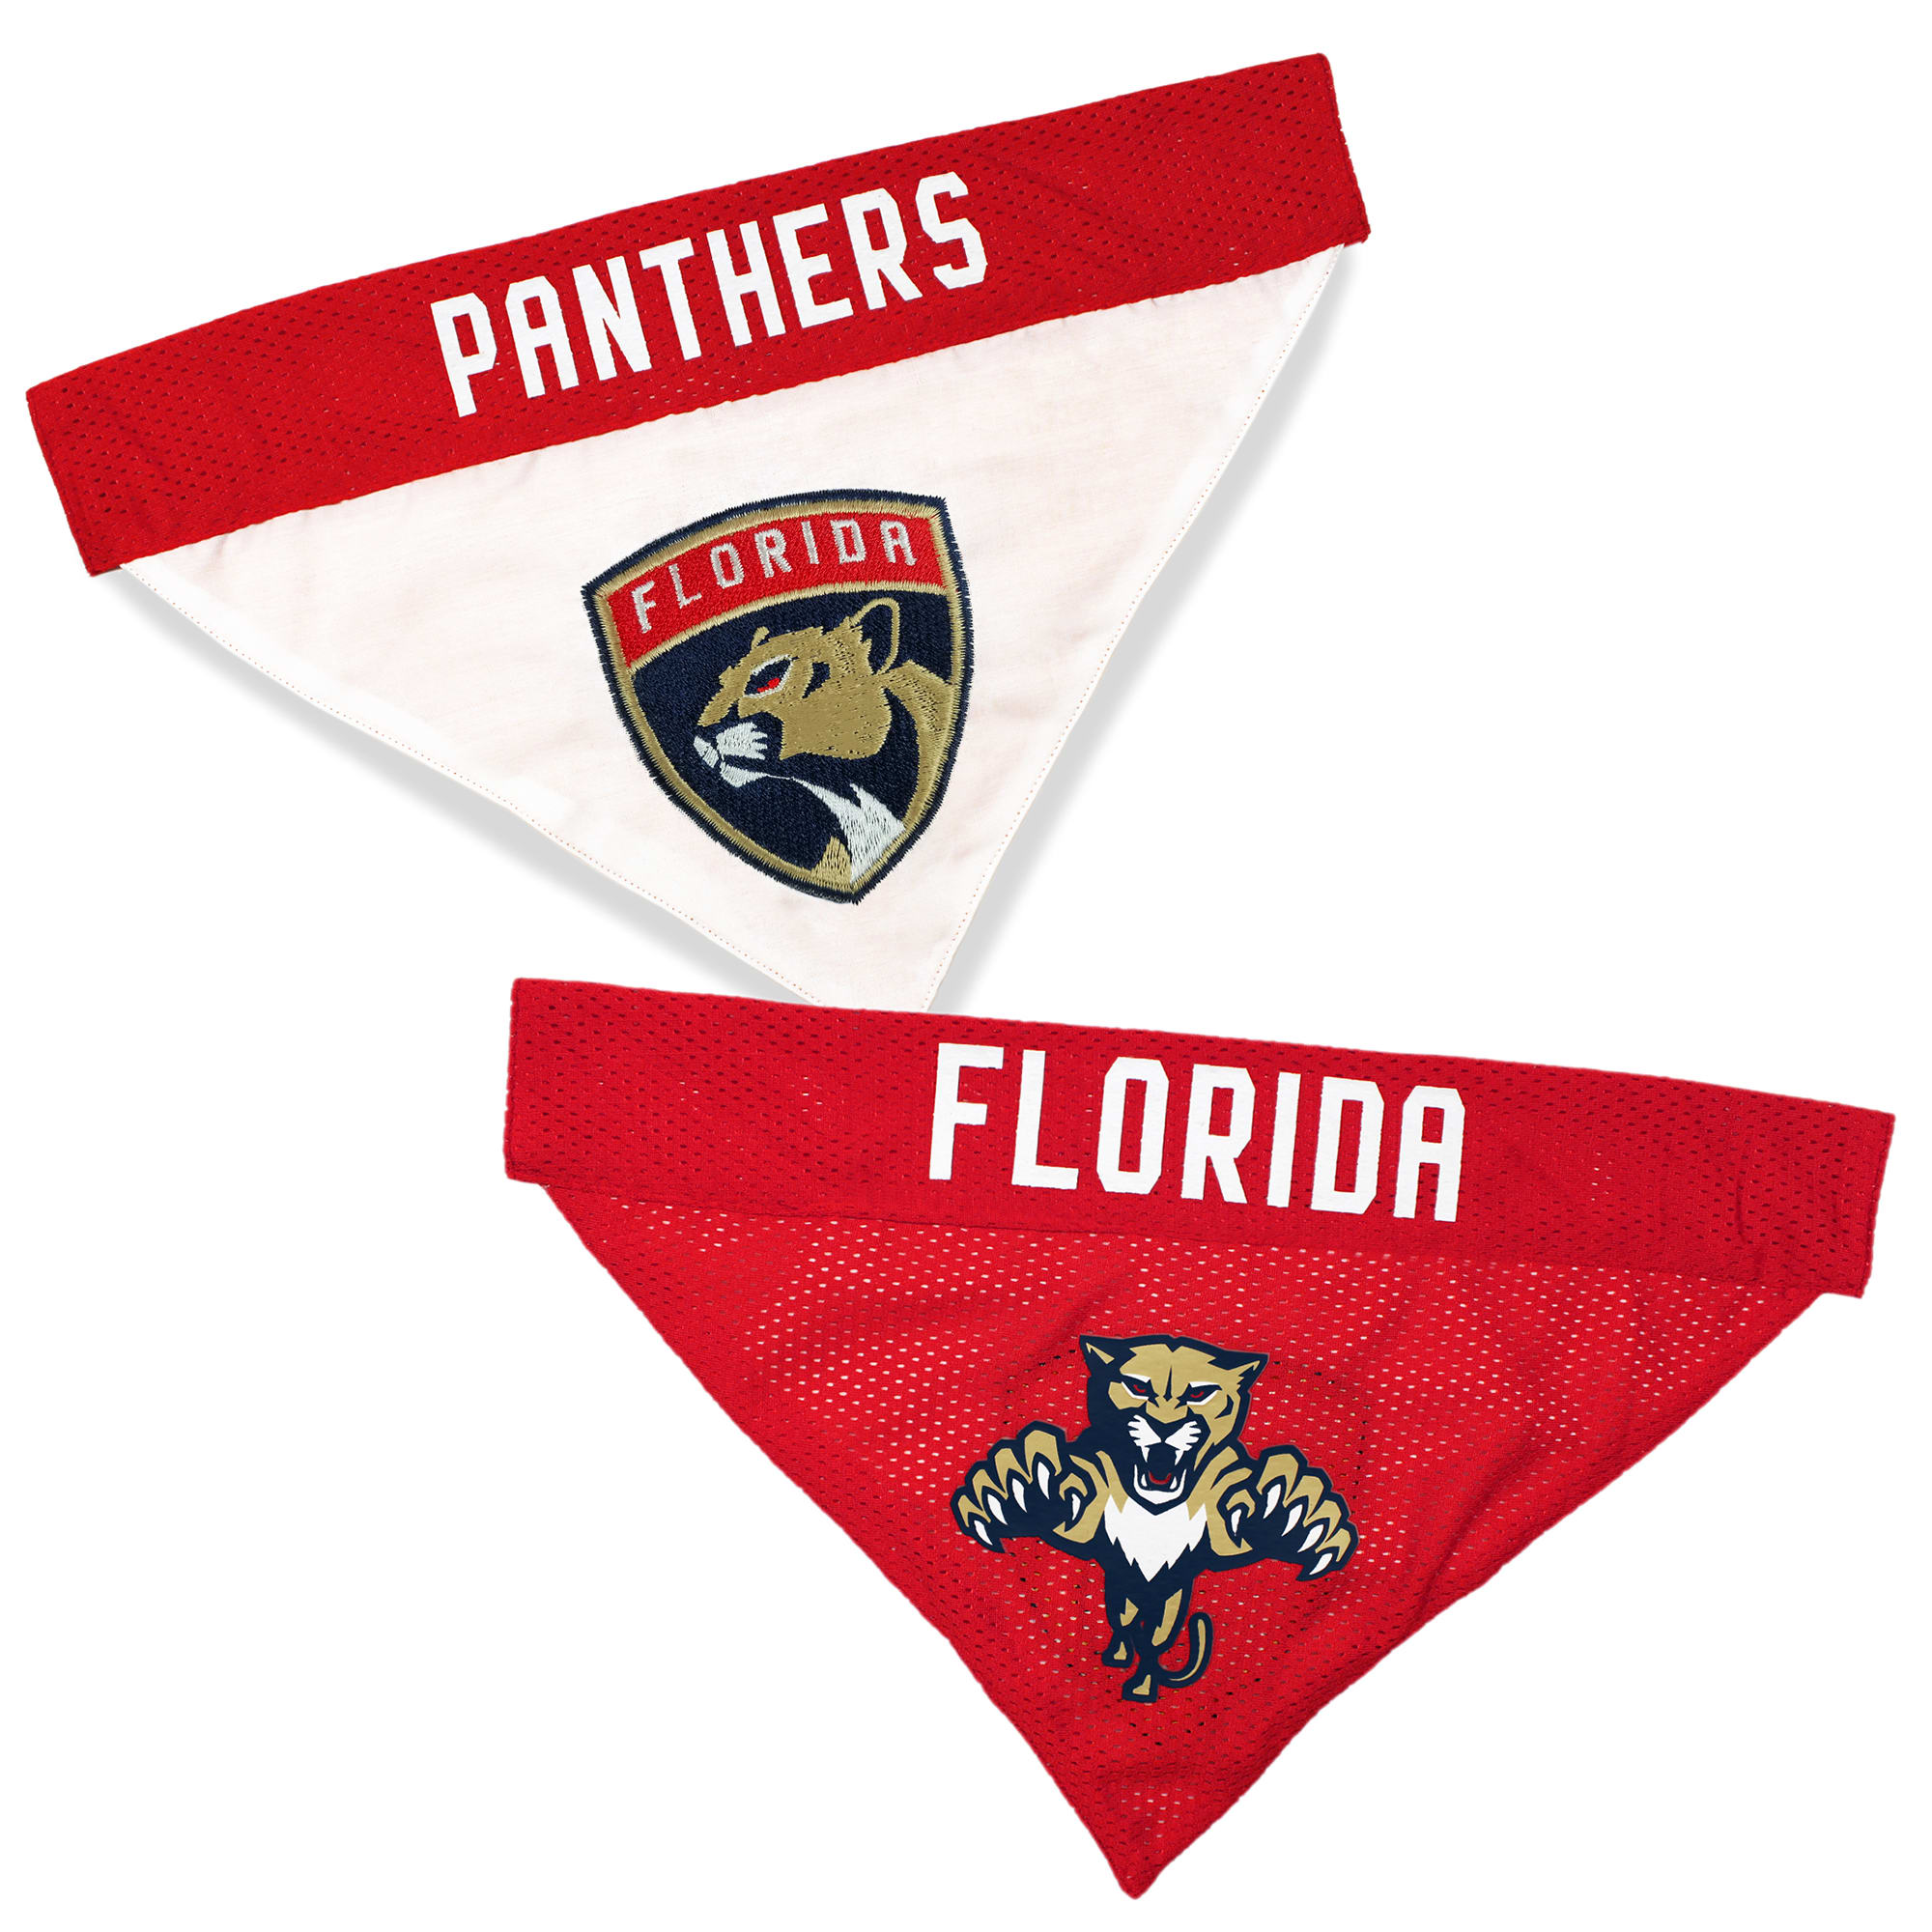 NEW FLORIDA PANTHERS PET DOG PREMIUM JERSEY w/NAME TAG ALL SIZES LICENSED 